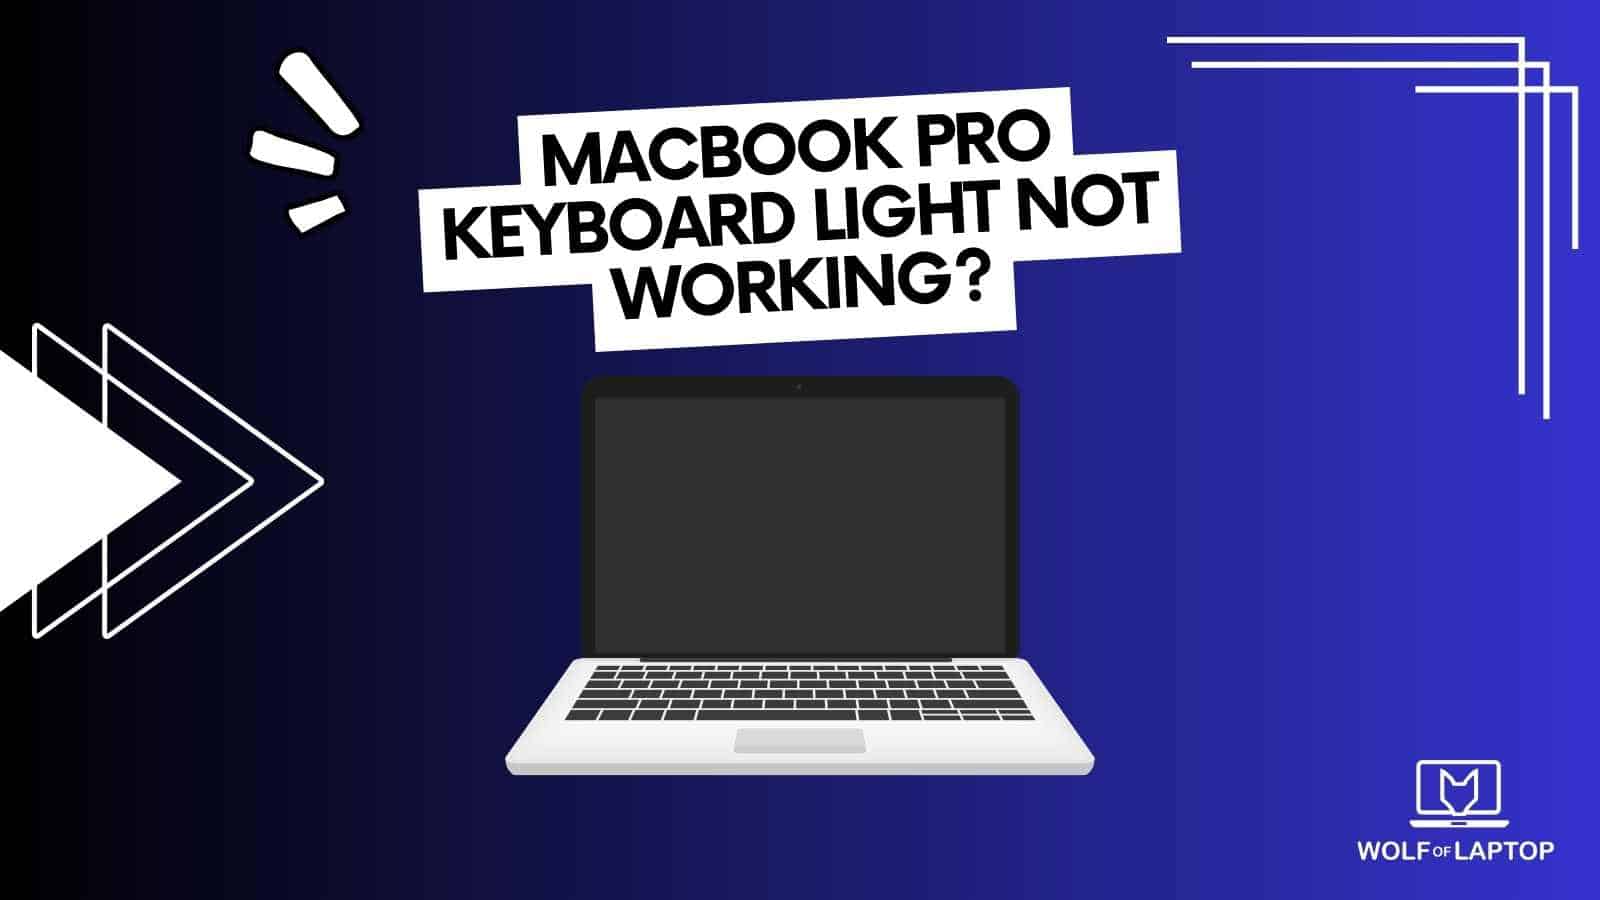 macbook pro keyboard light not working? we have possible solutions how you can fix it